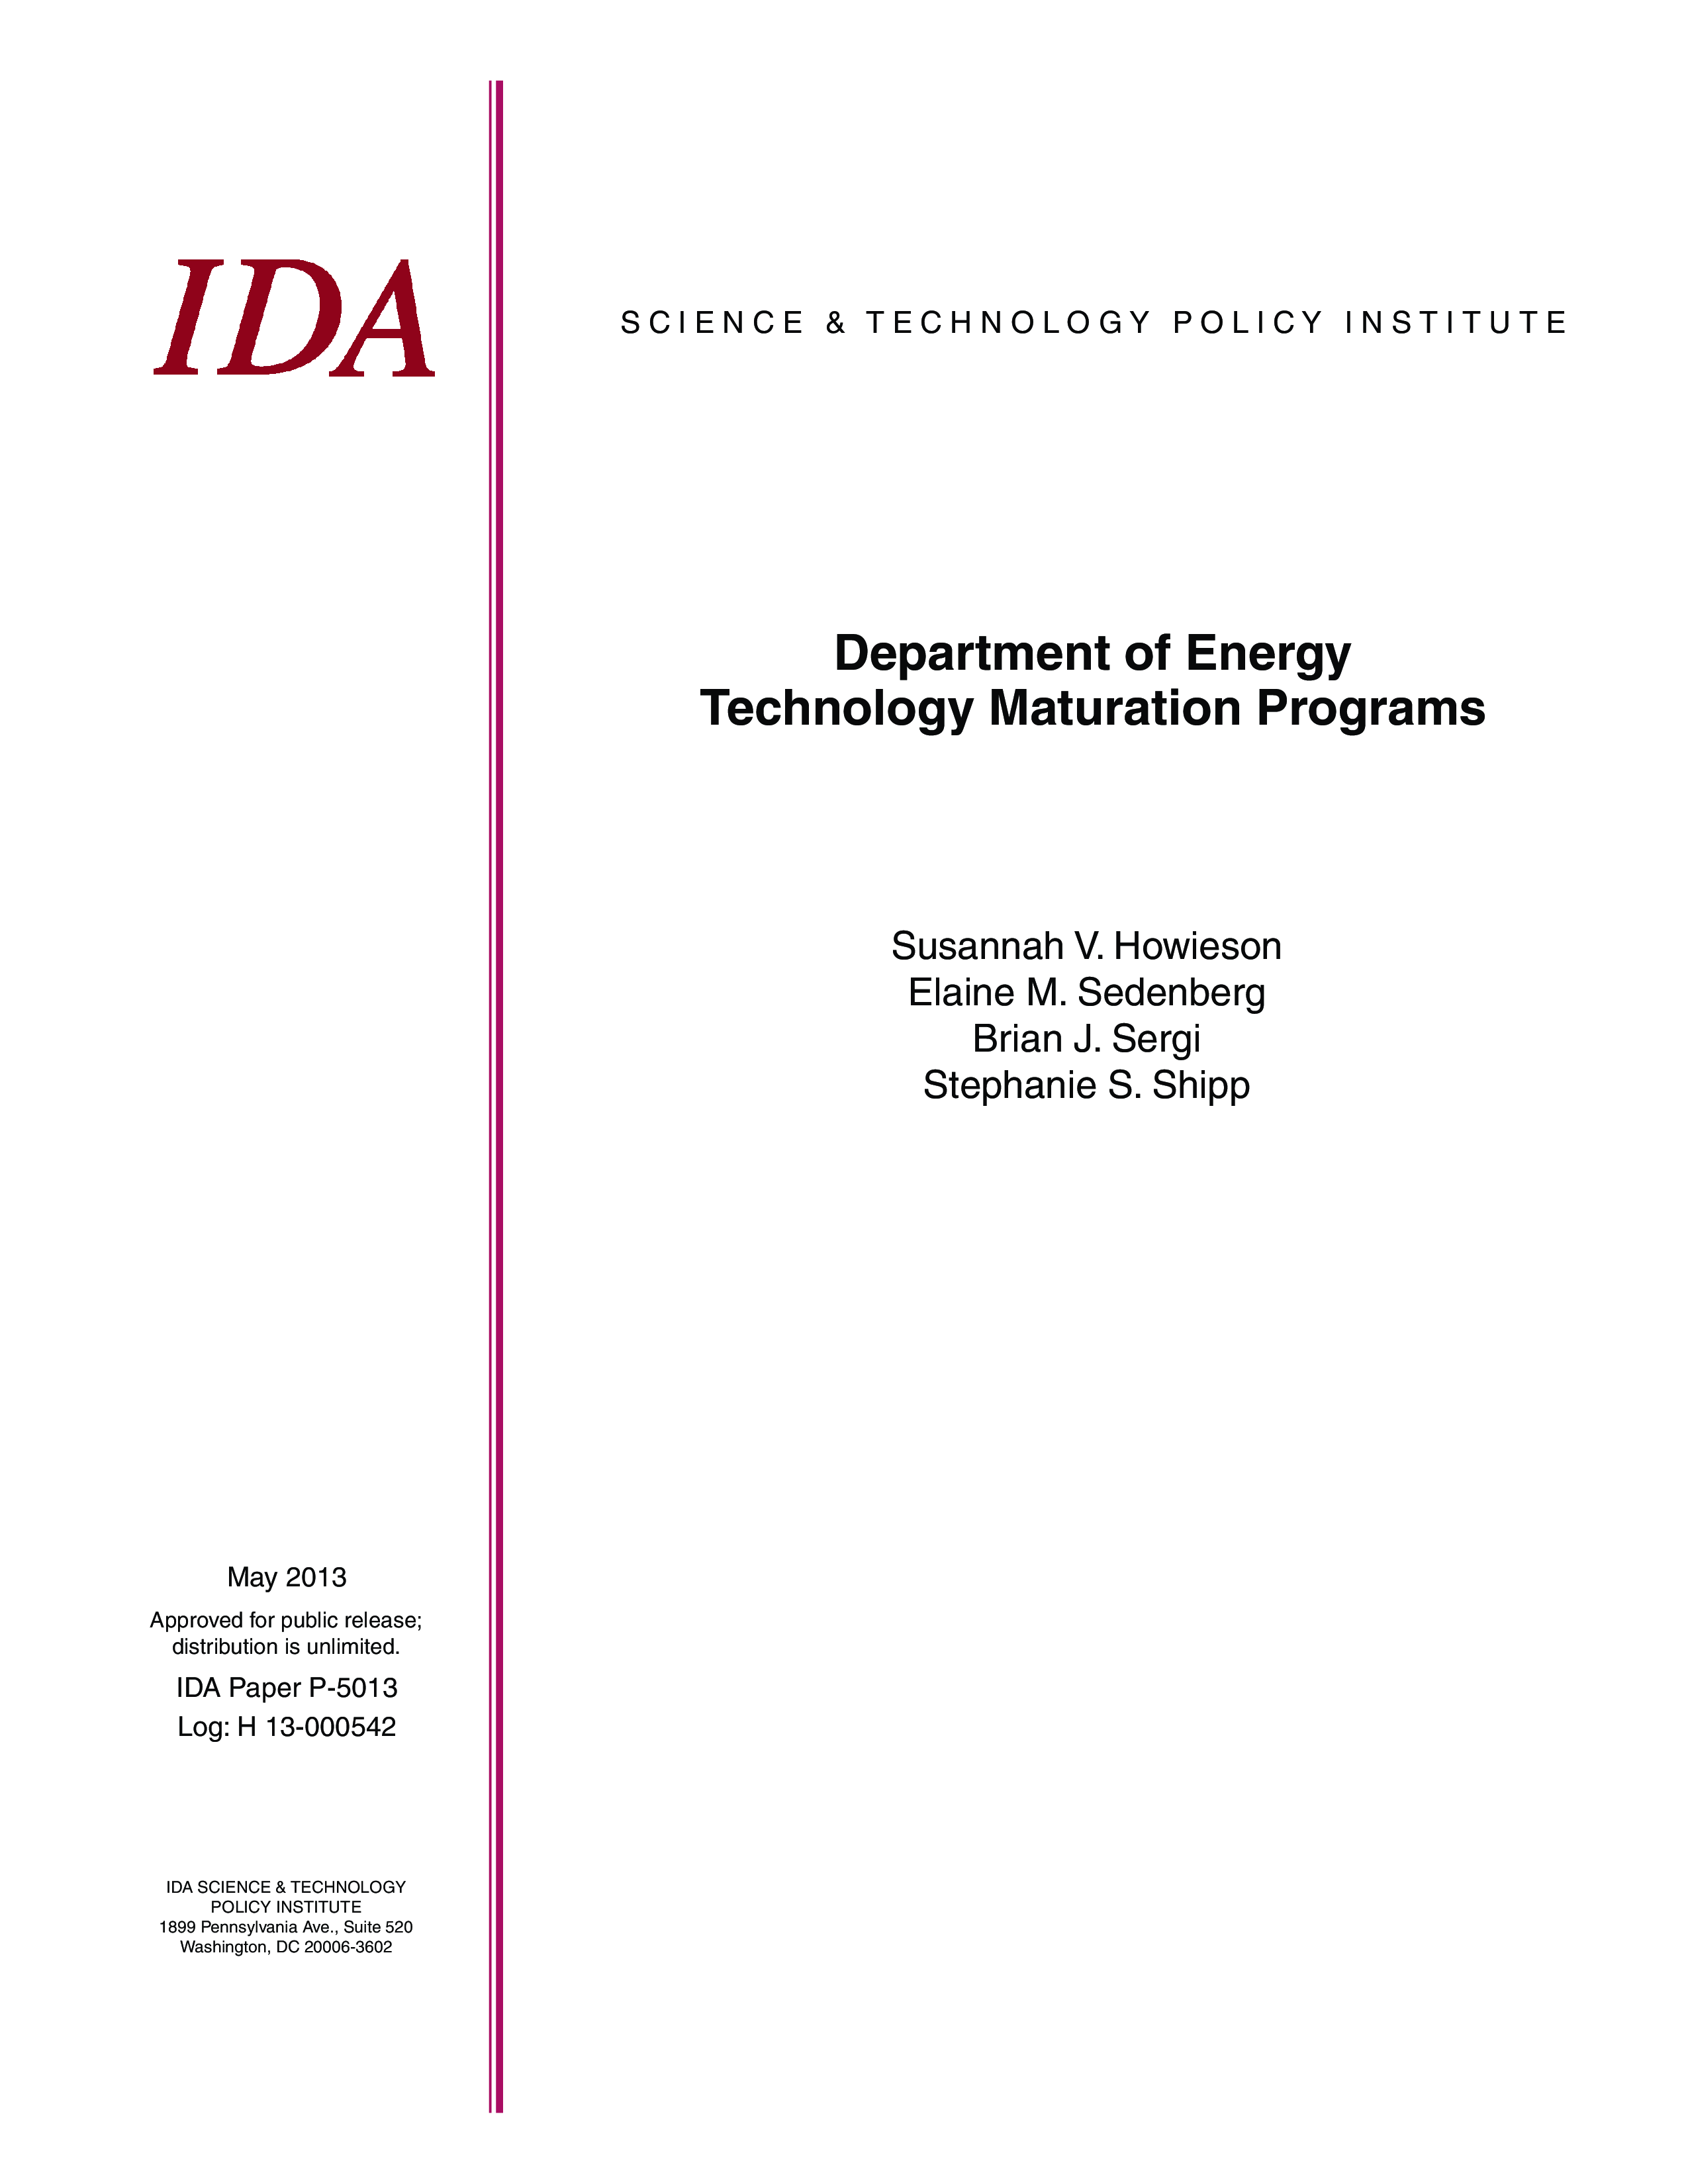 Department of Energy Technology Maturation Programs